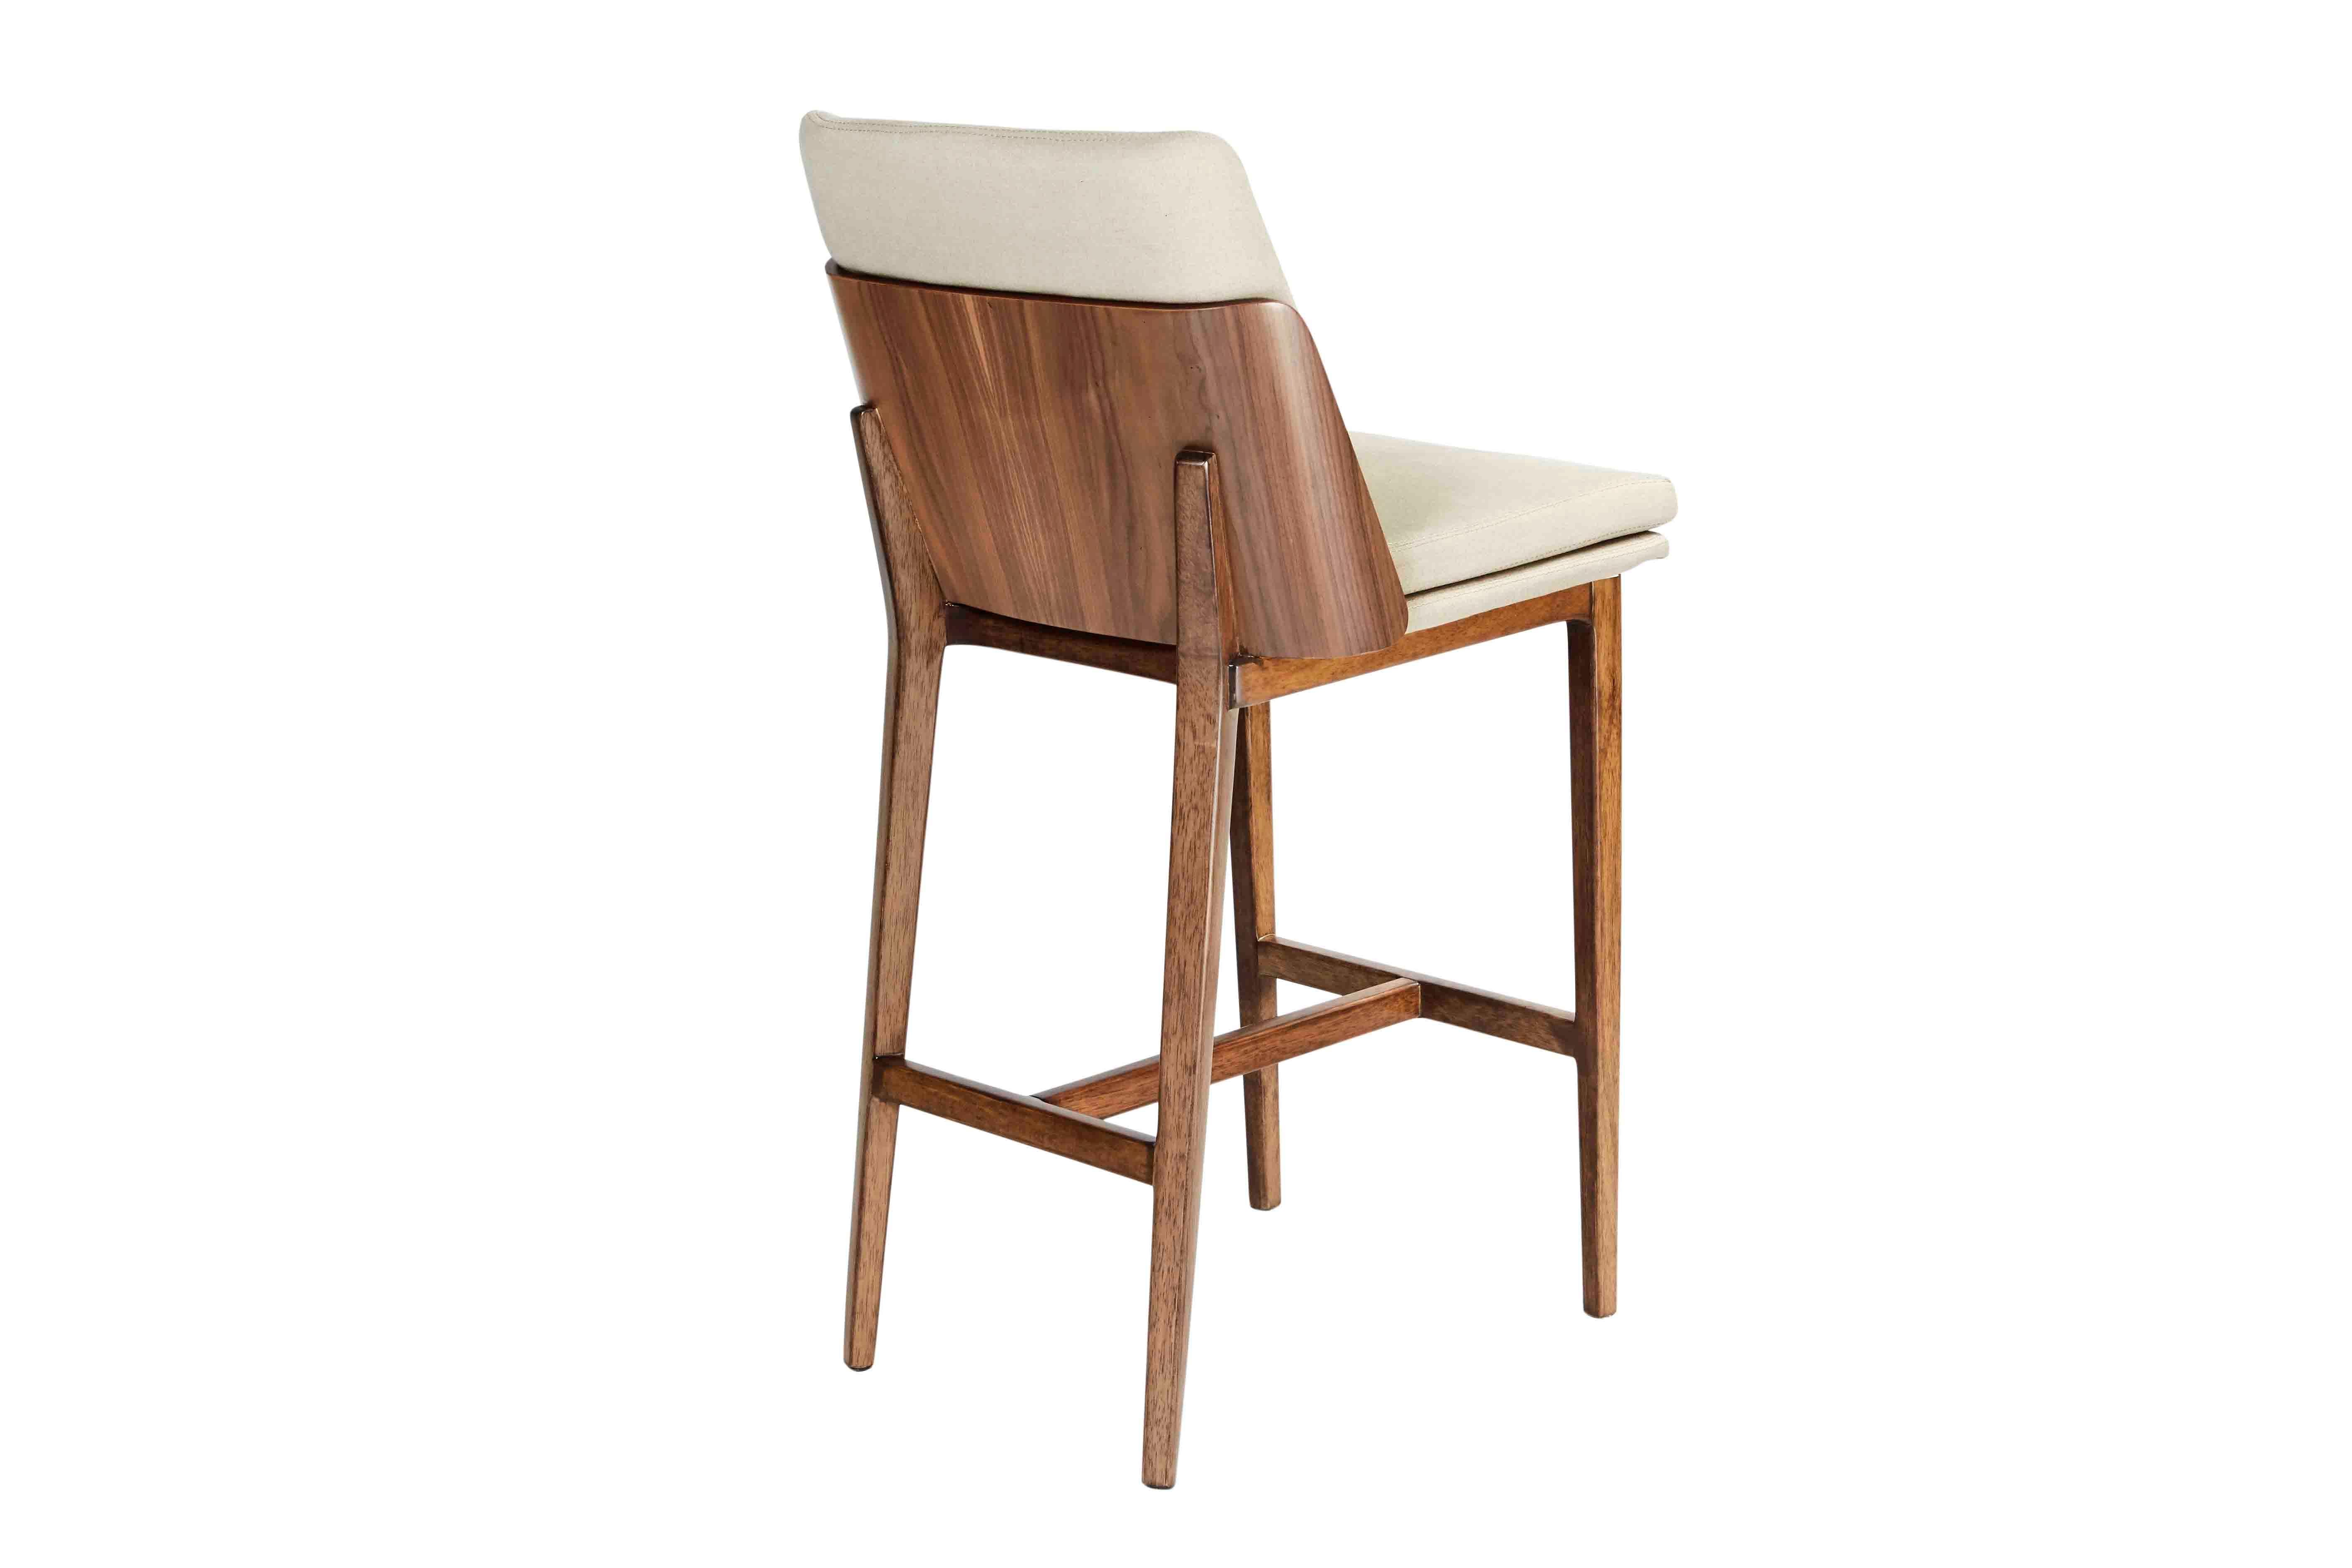 Structure in wood
seat and backrest in fabric off-white.
 